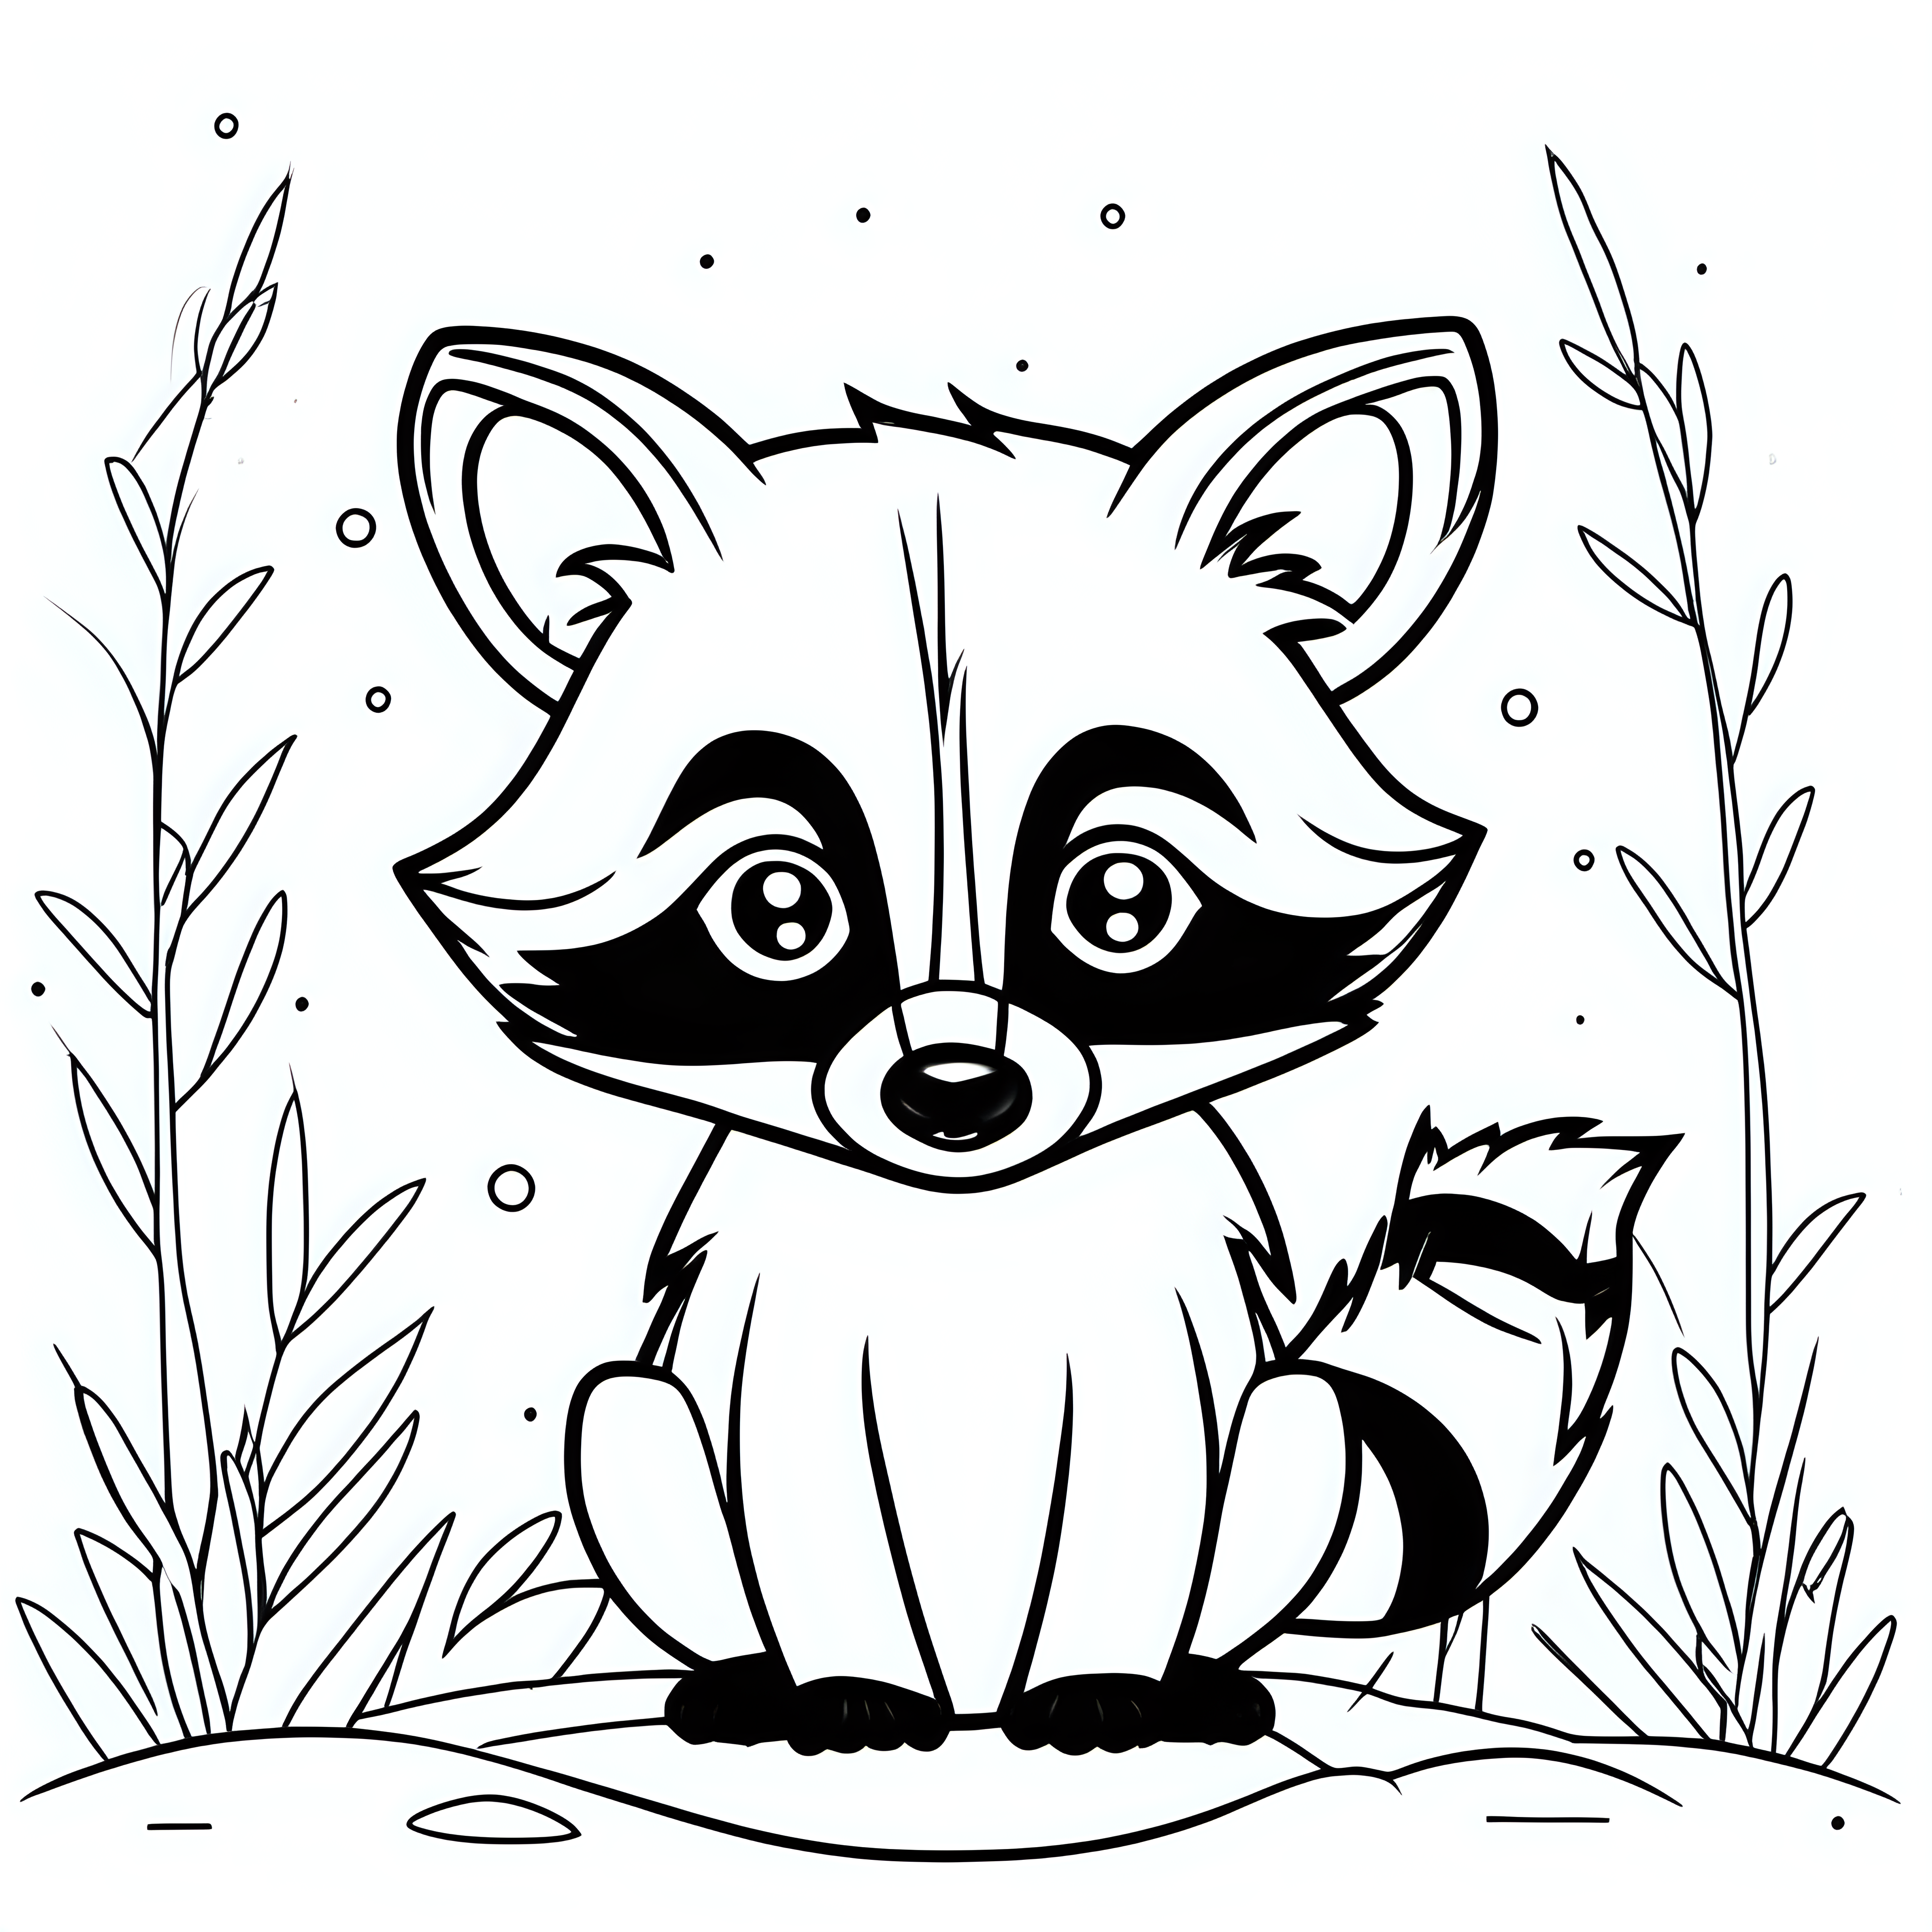 draw a cute Raccoon with only the outline  for a coloring book